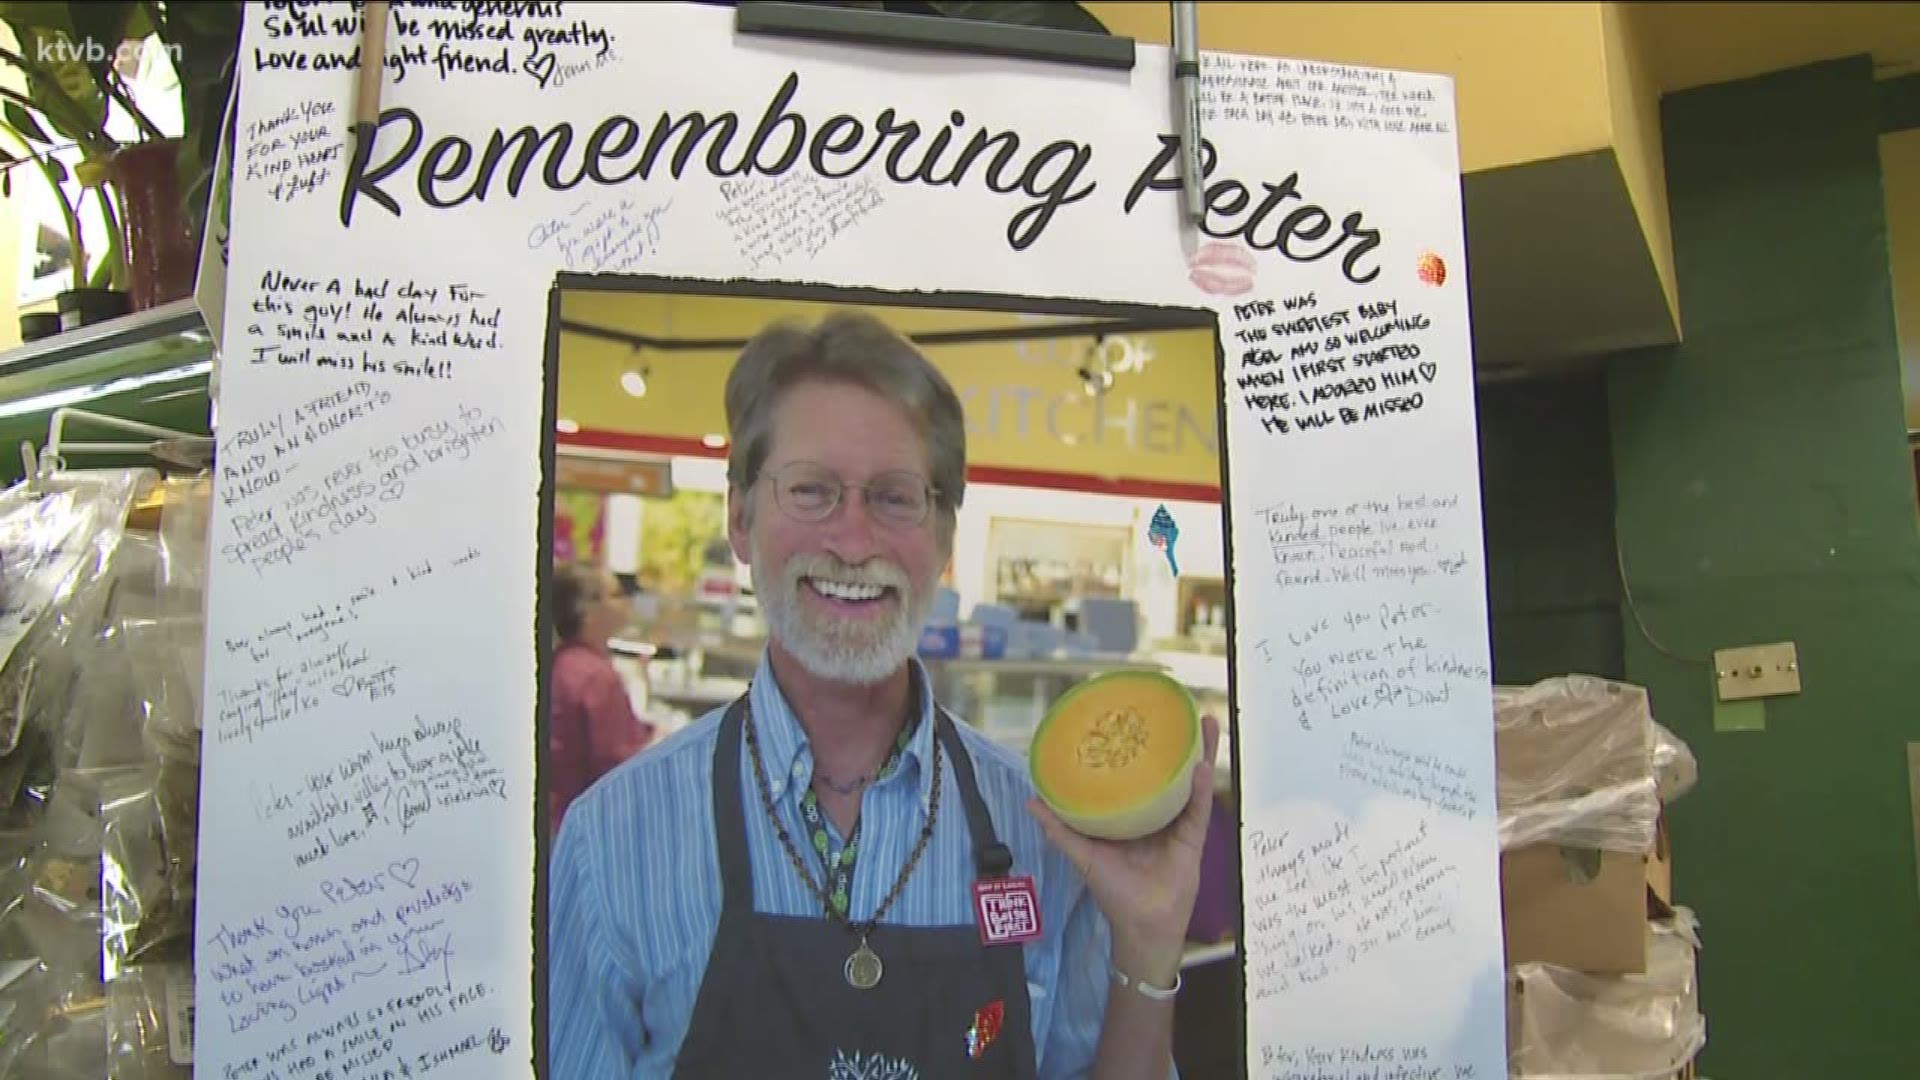 Peter Tanorikiho worked at the Boise Co-op for 30 years. Co-workers say he will be missed.